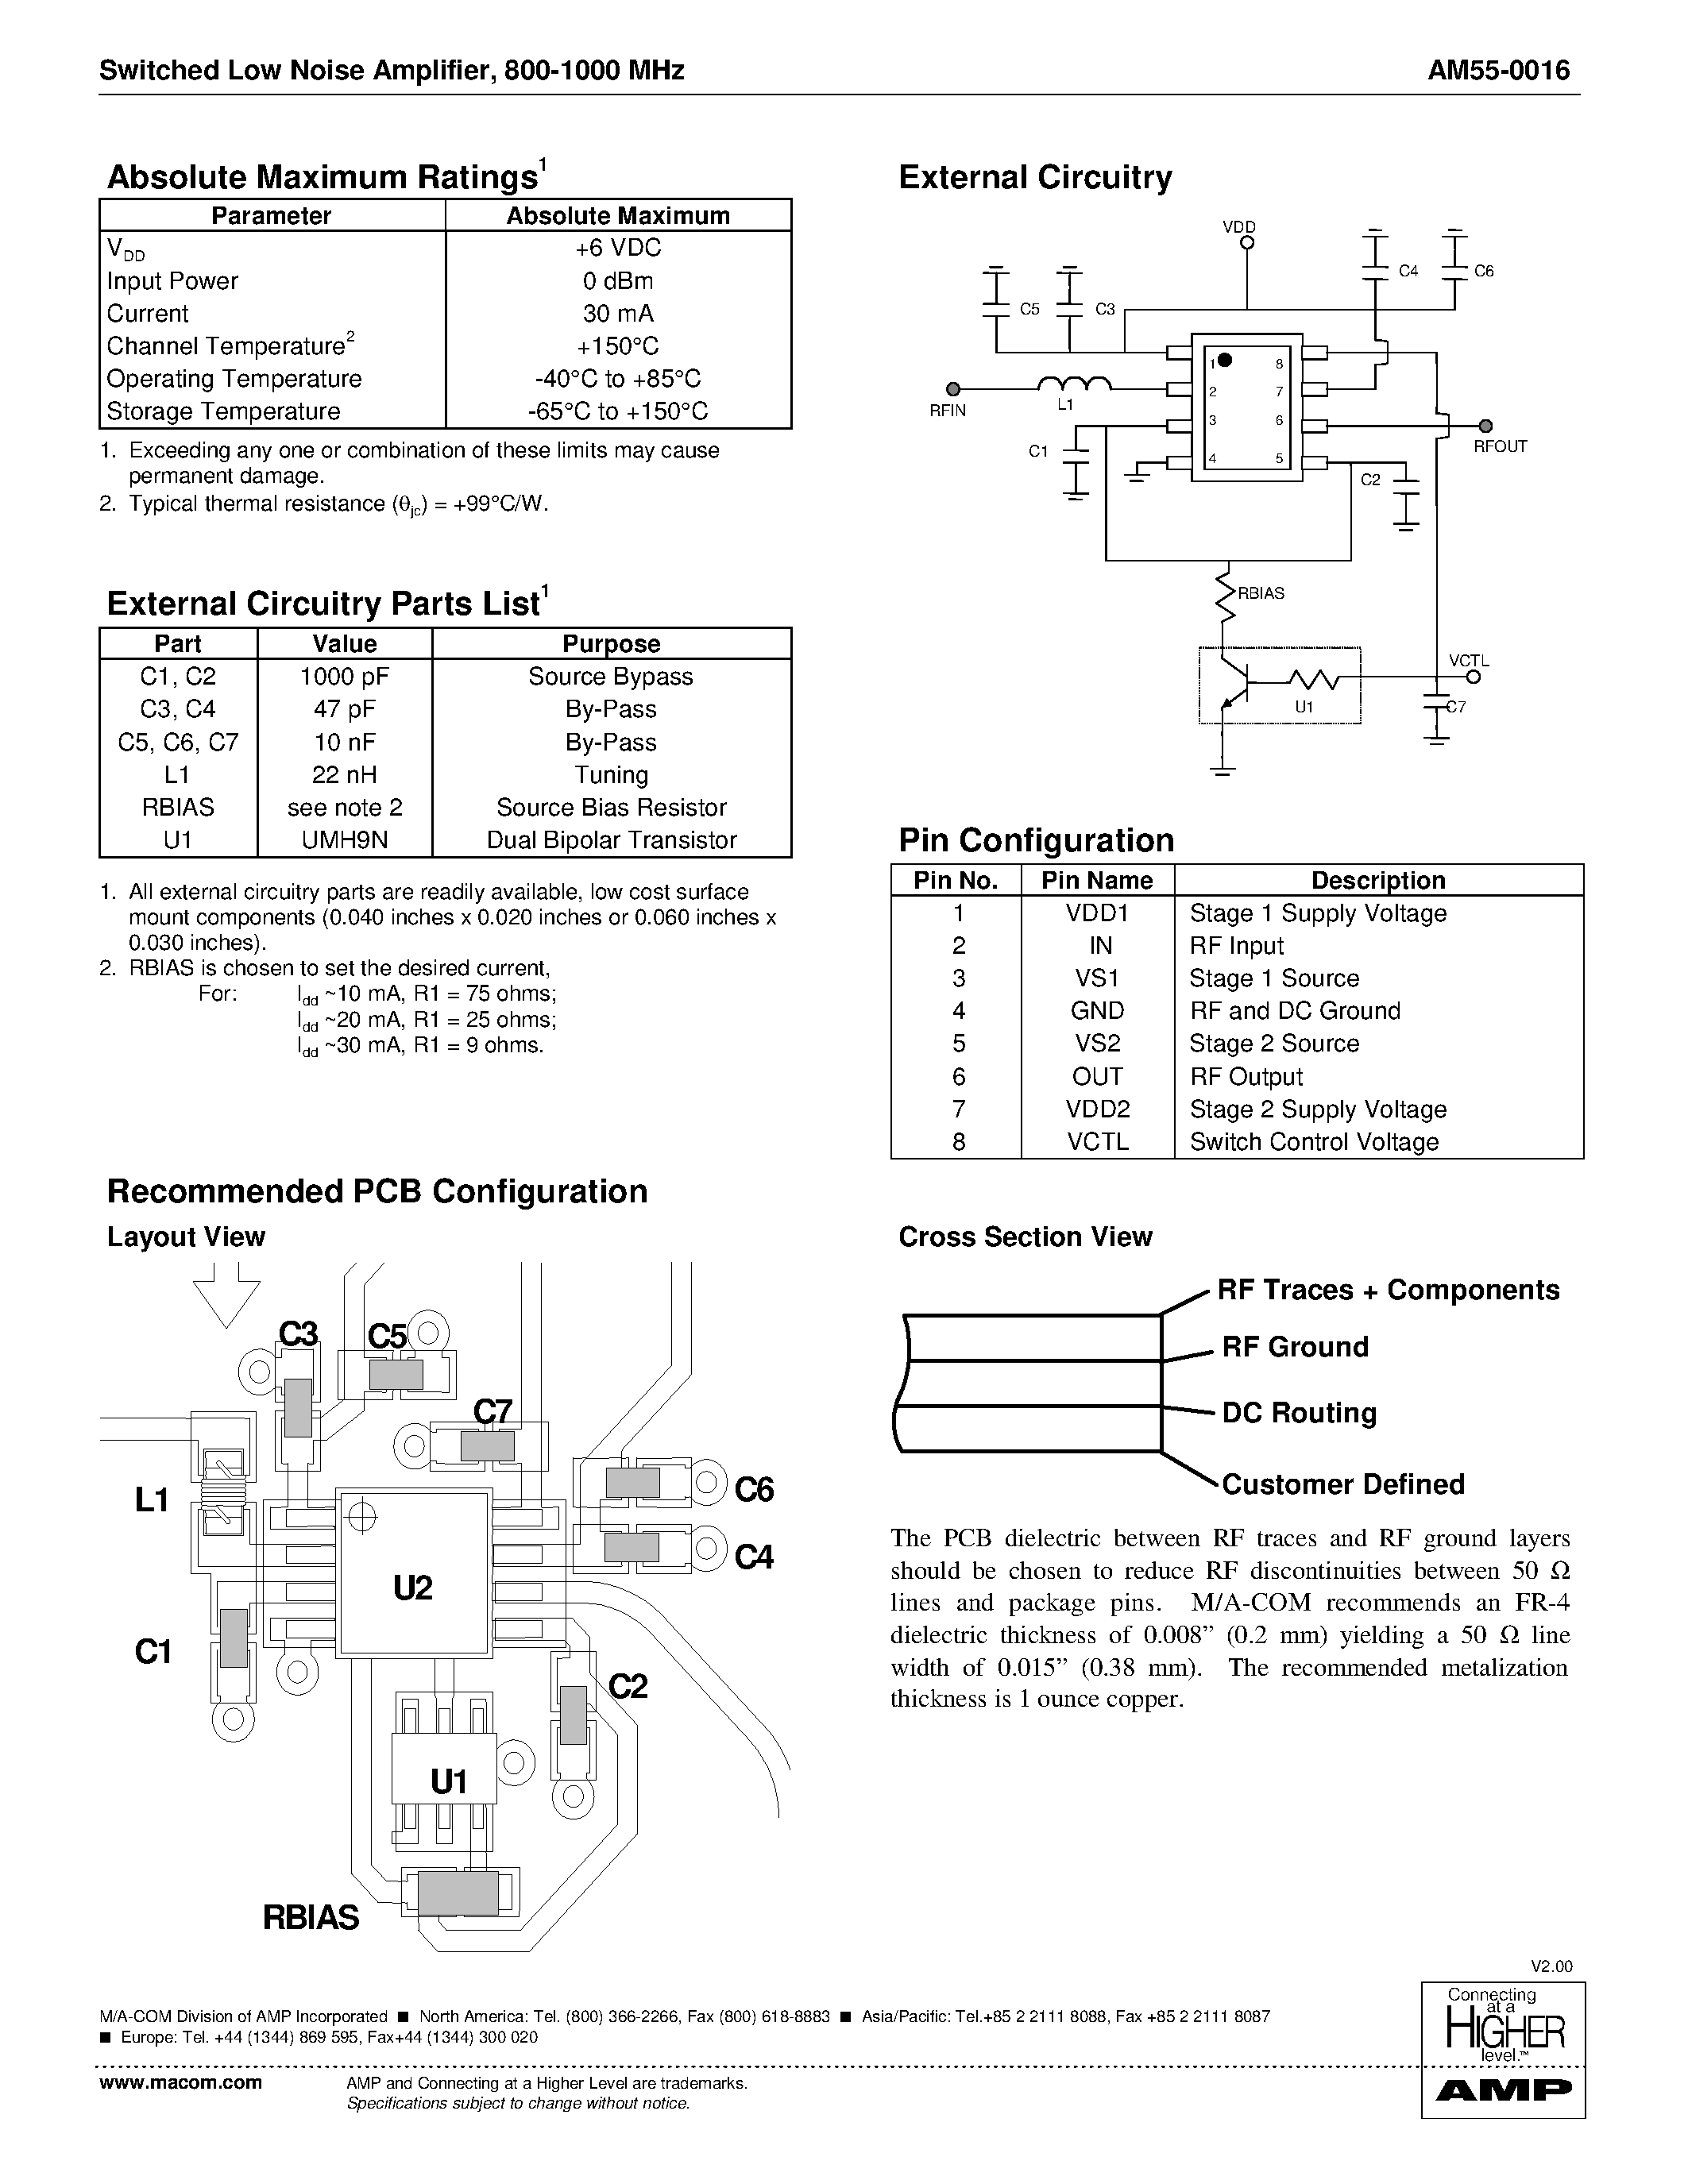 Datasheet AM55-0016SMB - Switched Low Noise Amplifier 800 - 1000 MHz page 2